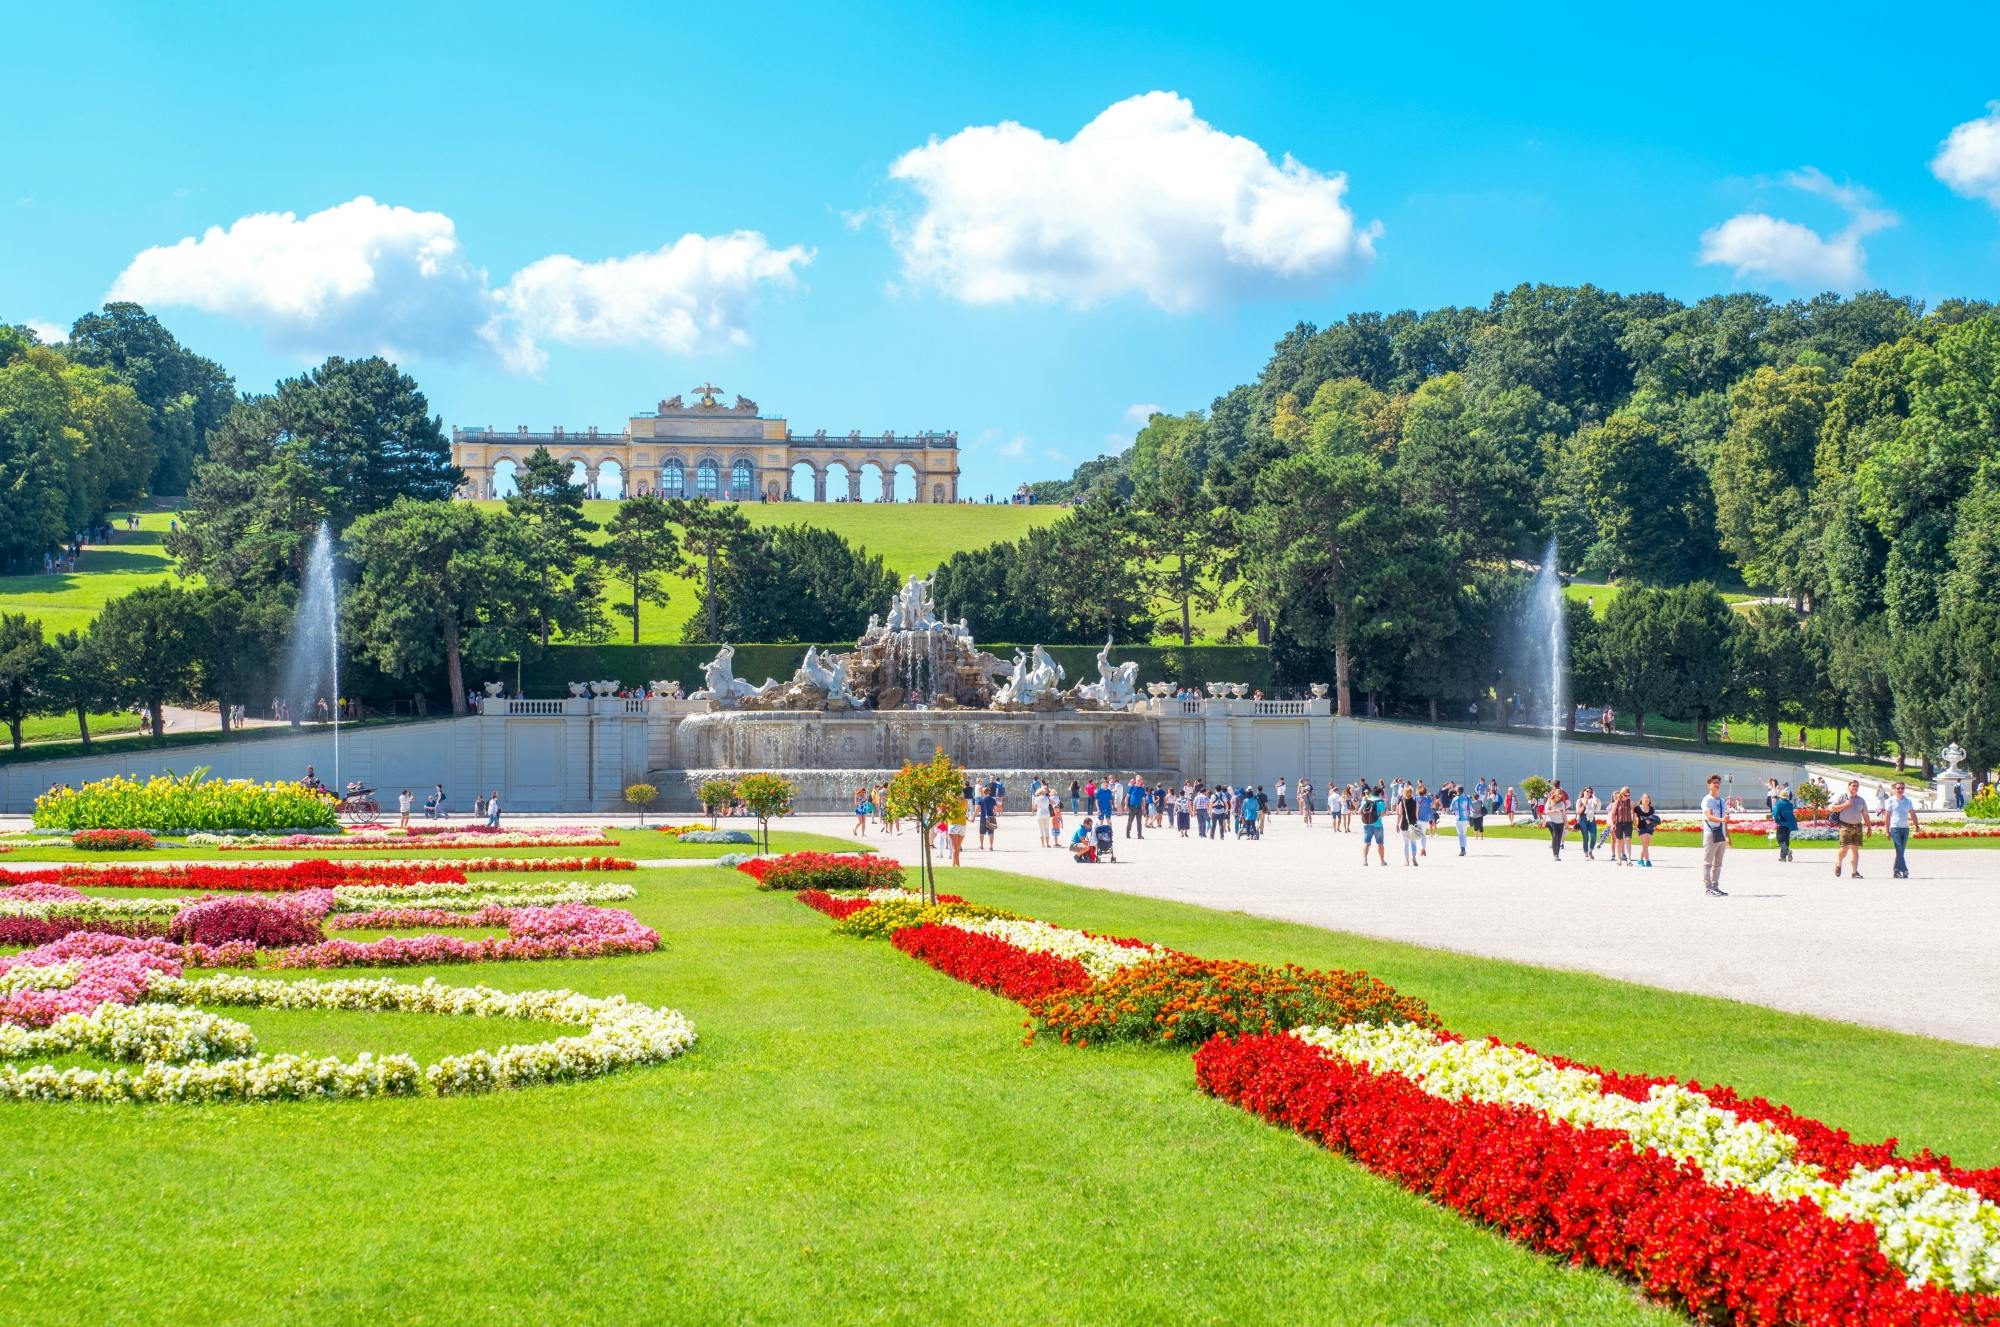 Skip-the-line tickets for Schönbrunn Palace and guided tour